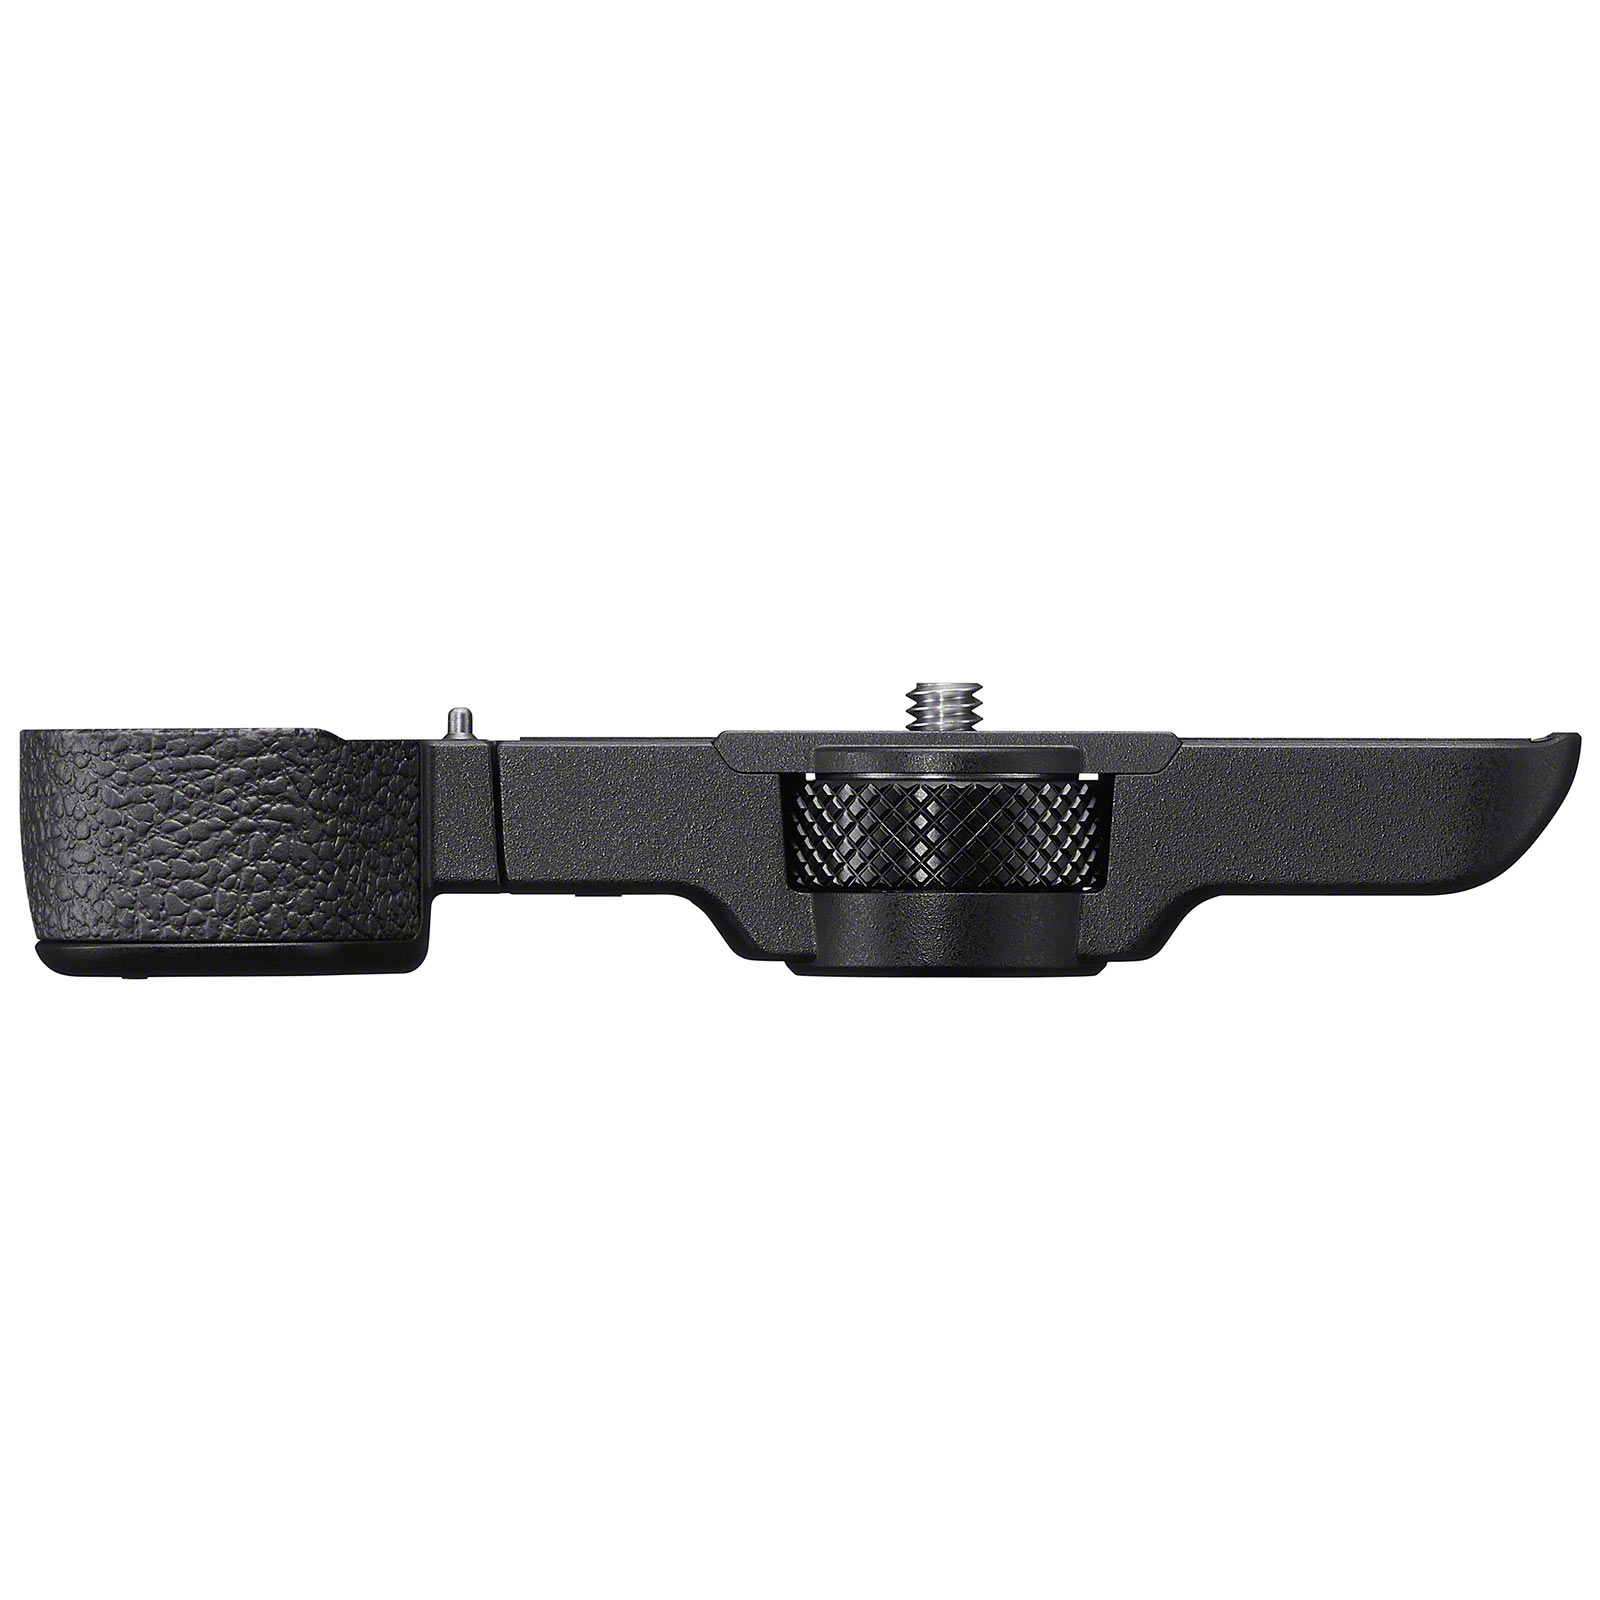 Image of Sony GPX2 Grip Extension for Sony A7CR